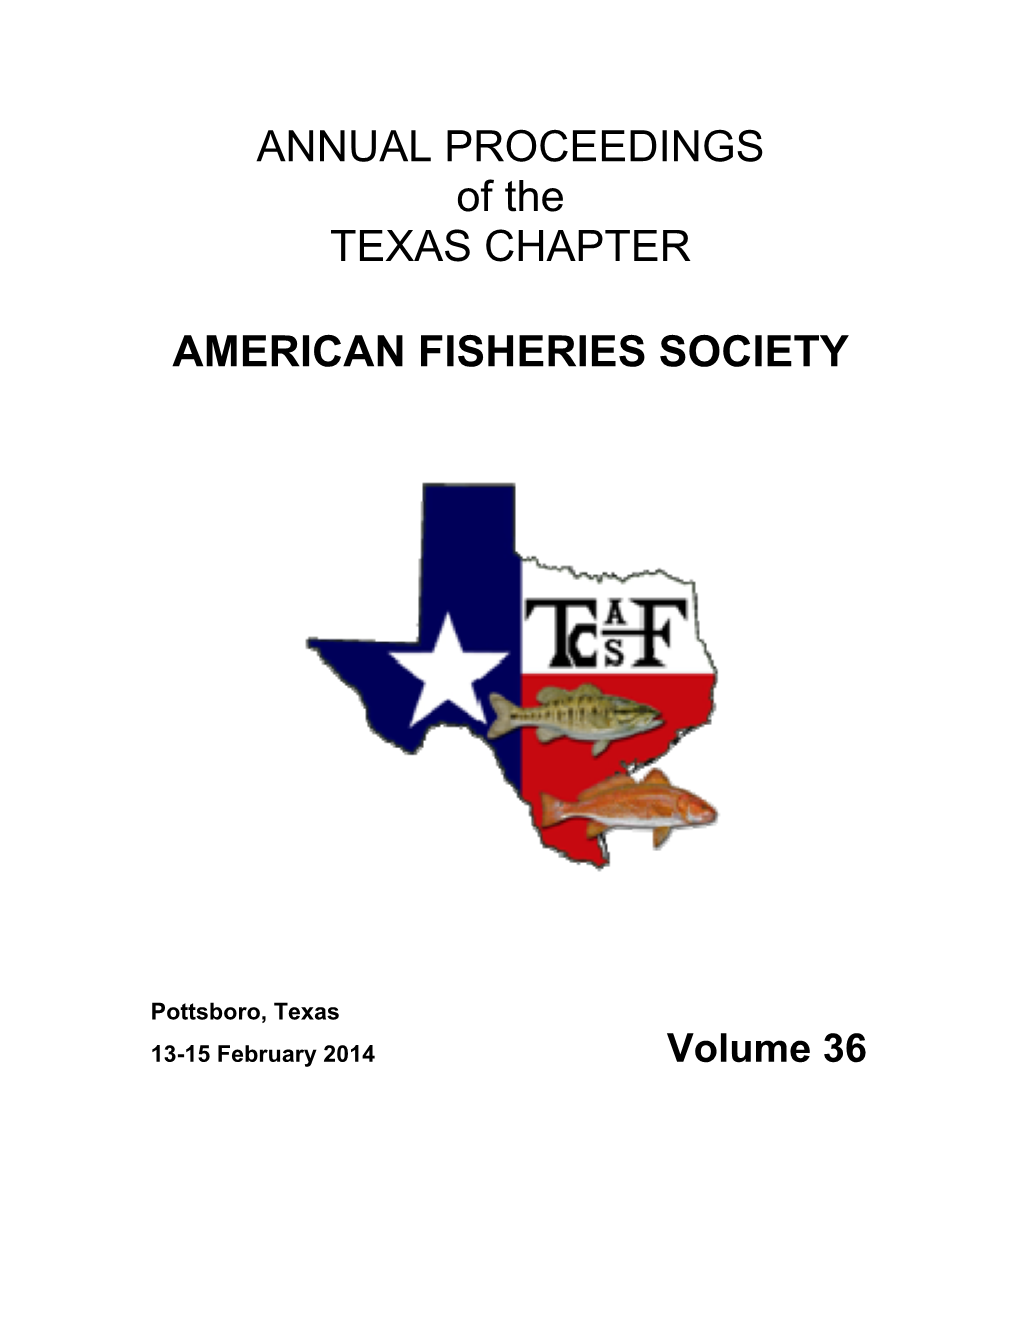 Annual Proceedings of the Texas Chapter American Fisheries Society